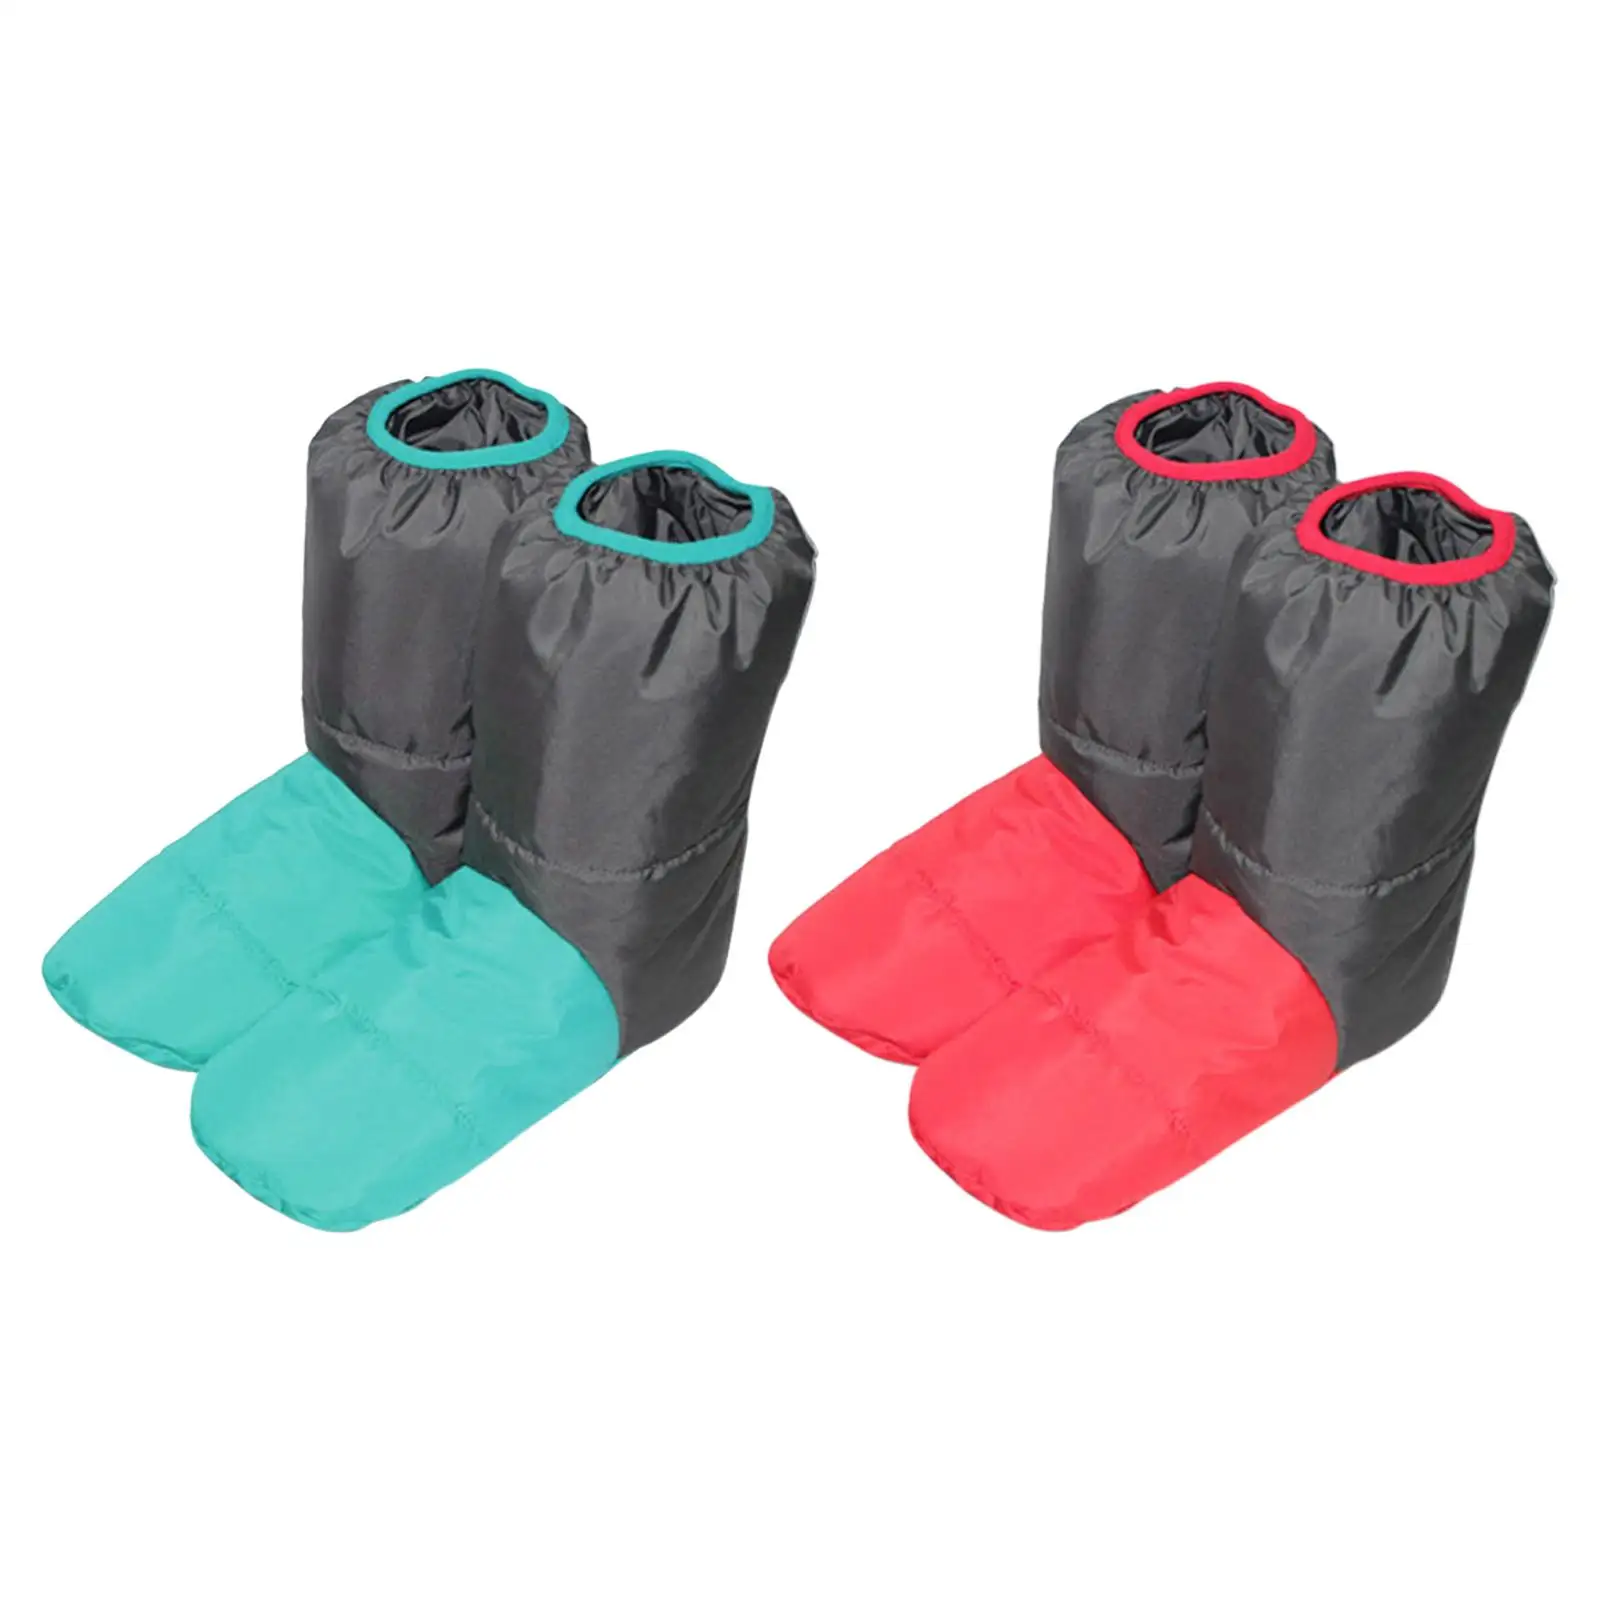 Down Booties Non Slip Footwear with Storage Bag Warm Boots Portable Sleeping Slippers for Camping Climbing Shoes Bed Home